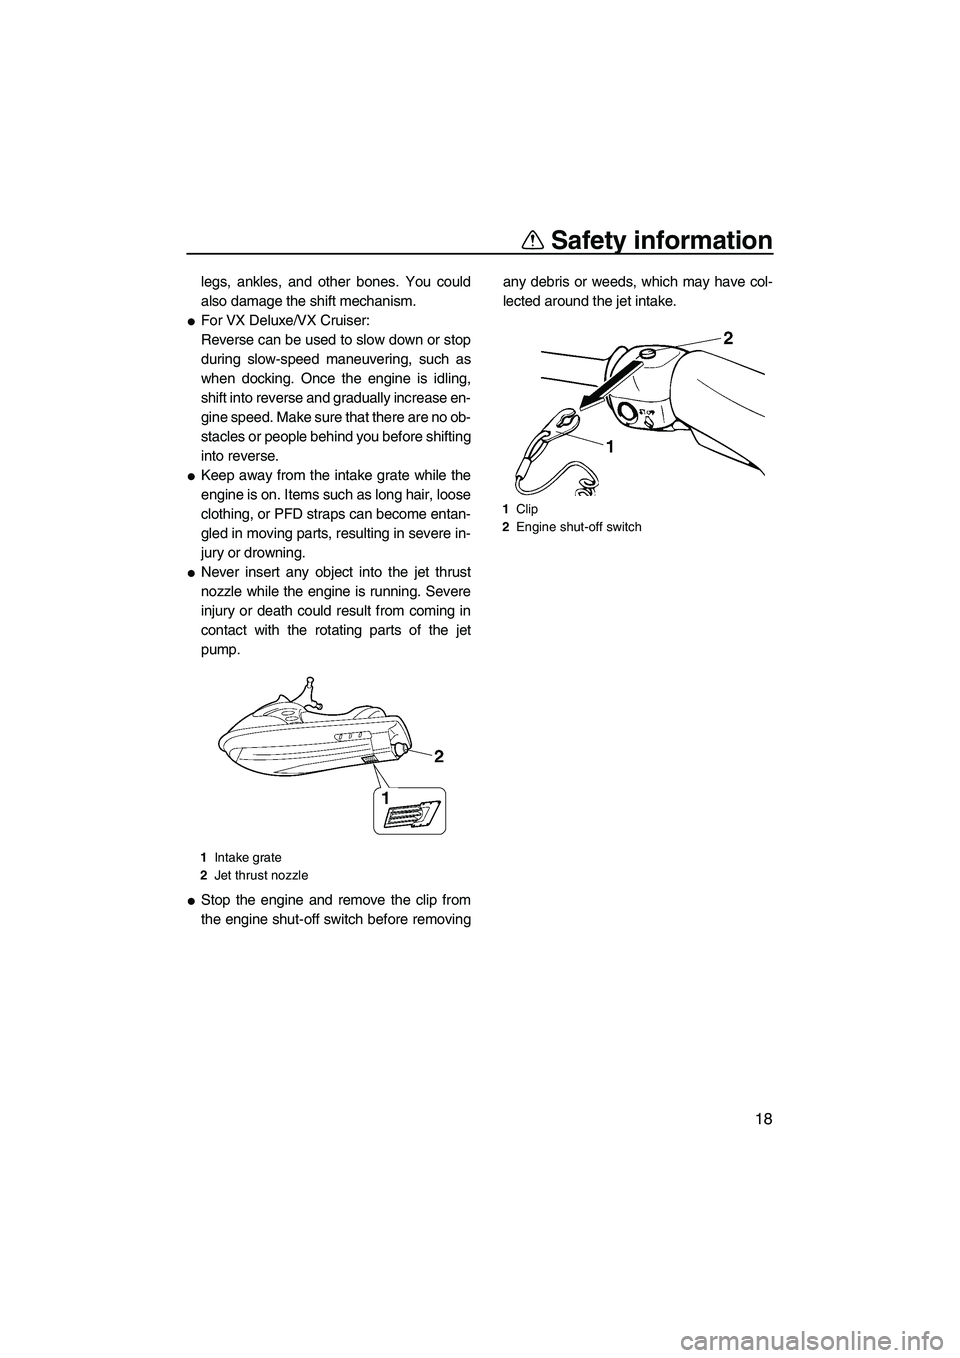 YAMAHA VX SPORT 2007  Owners Manual Safety information
18
legs, ankles, and other bones. You could
also damage the shift mechanism.
For VX Deluxe/VX Cruiser:
Reverse can be used to slow down or stop
during slow-speed maneuvering, such 